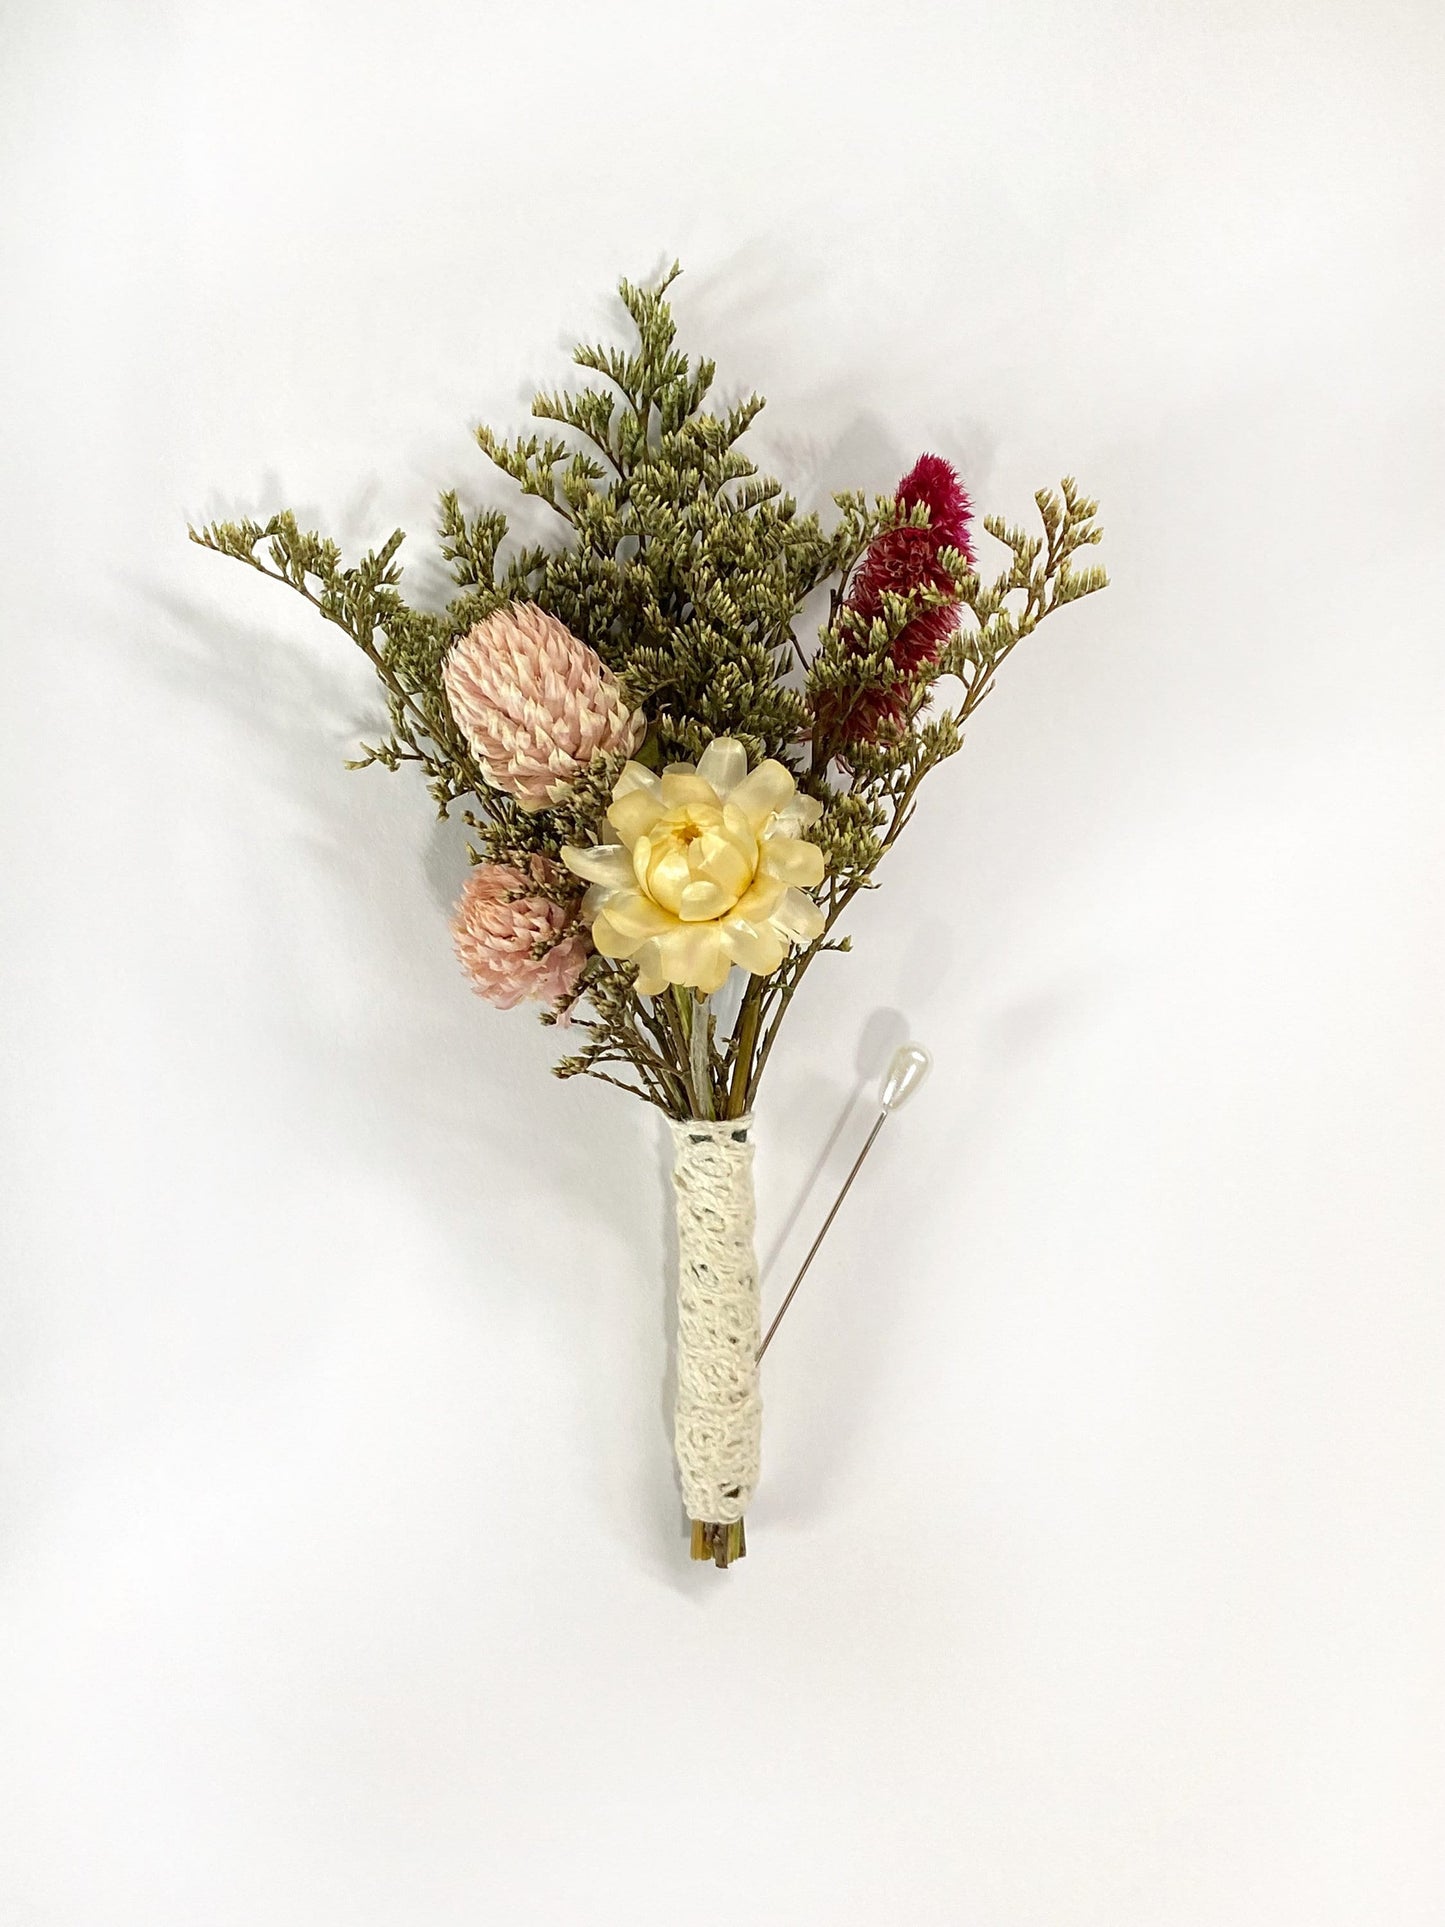 Floral Bouquet, Preserved Flower, Gift, Wedding , Anniversary gift, Coxcomb, Caspia, Strawflower, Amaranth, Peony, Pink, Green, Bridal